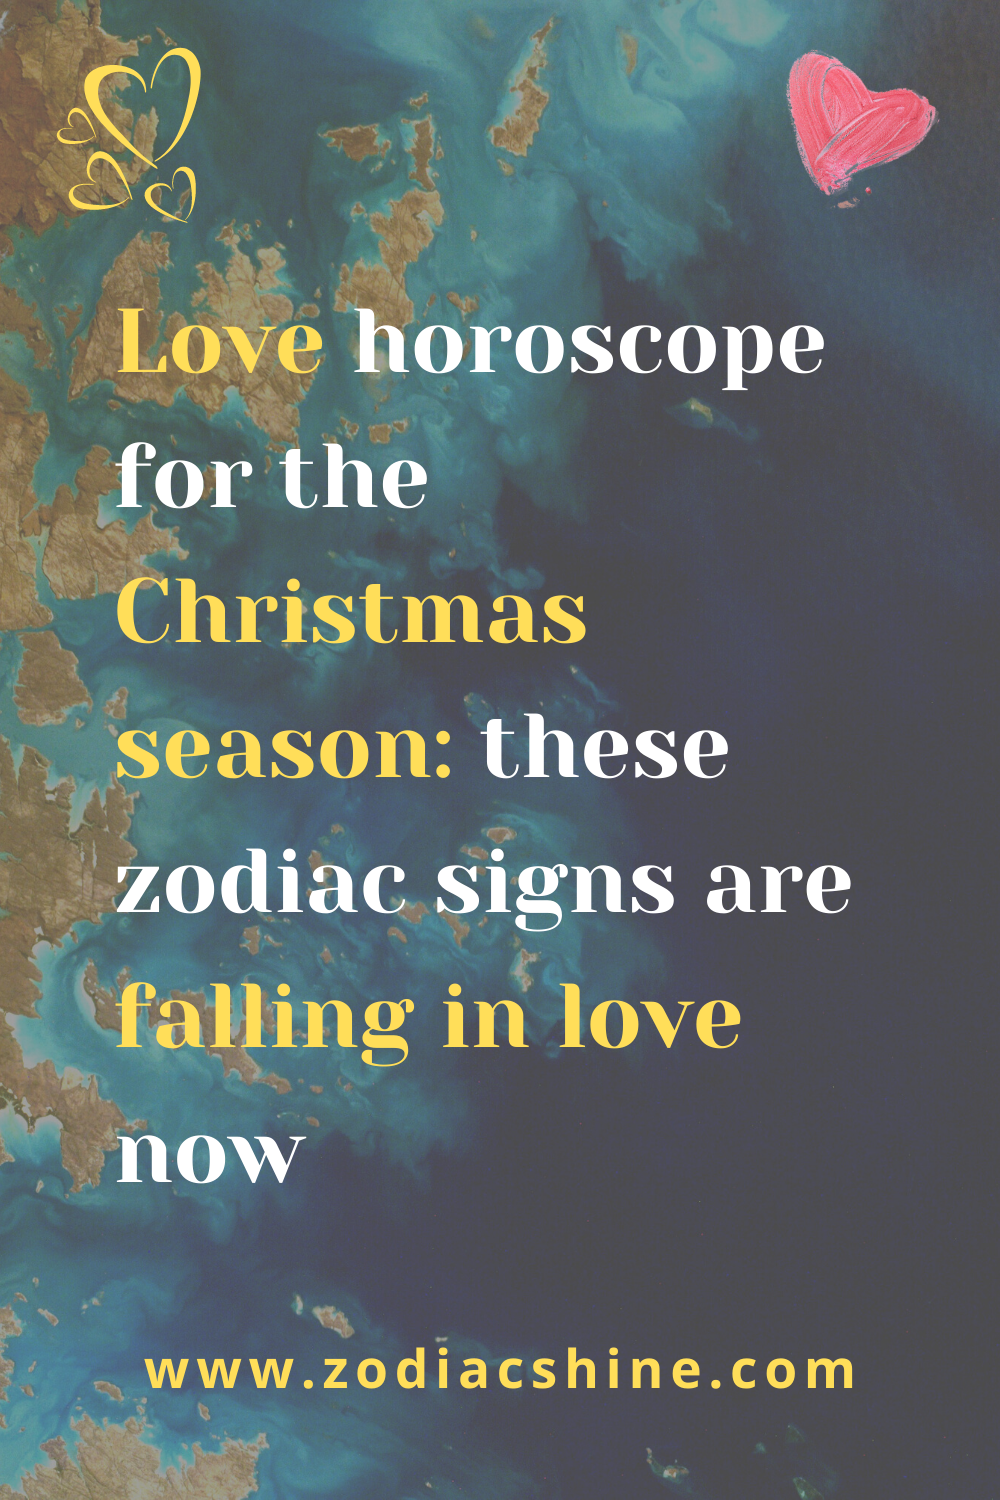 Love horoscope for the Christmas season: these zodiac signs are falling in love now